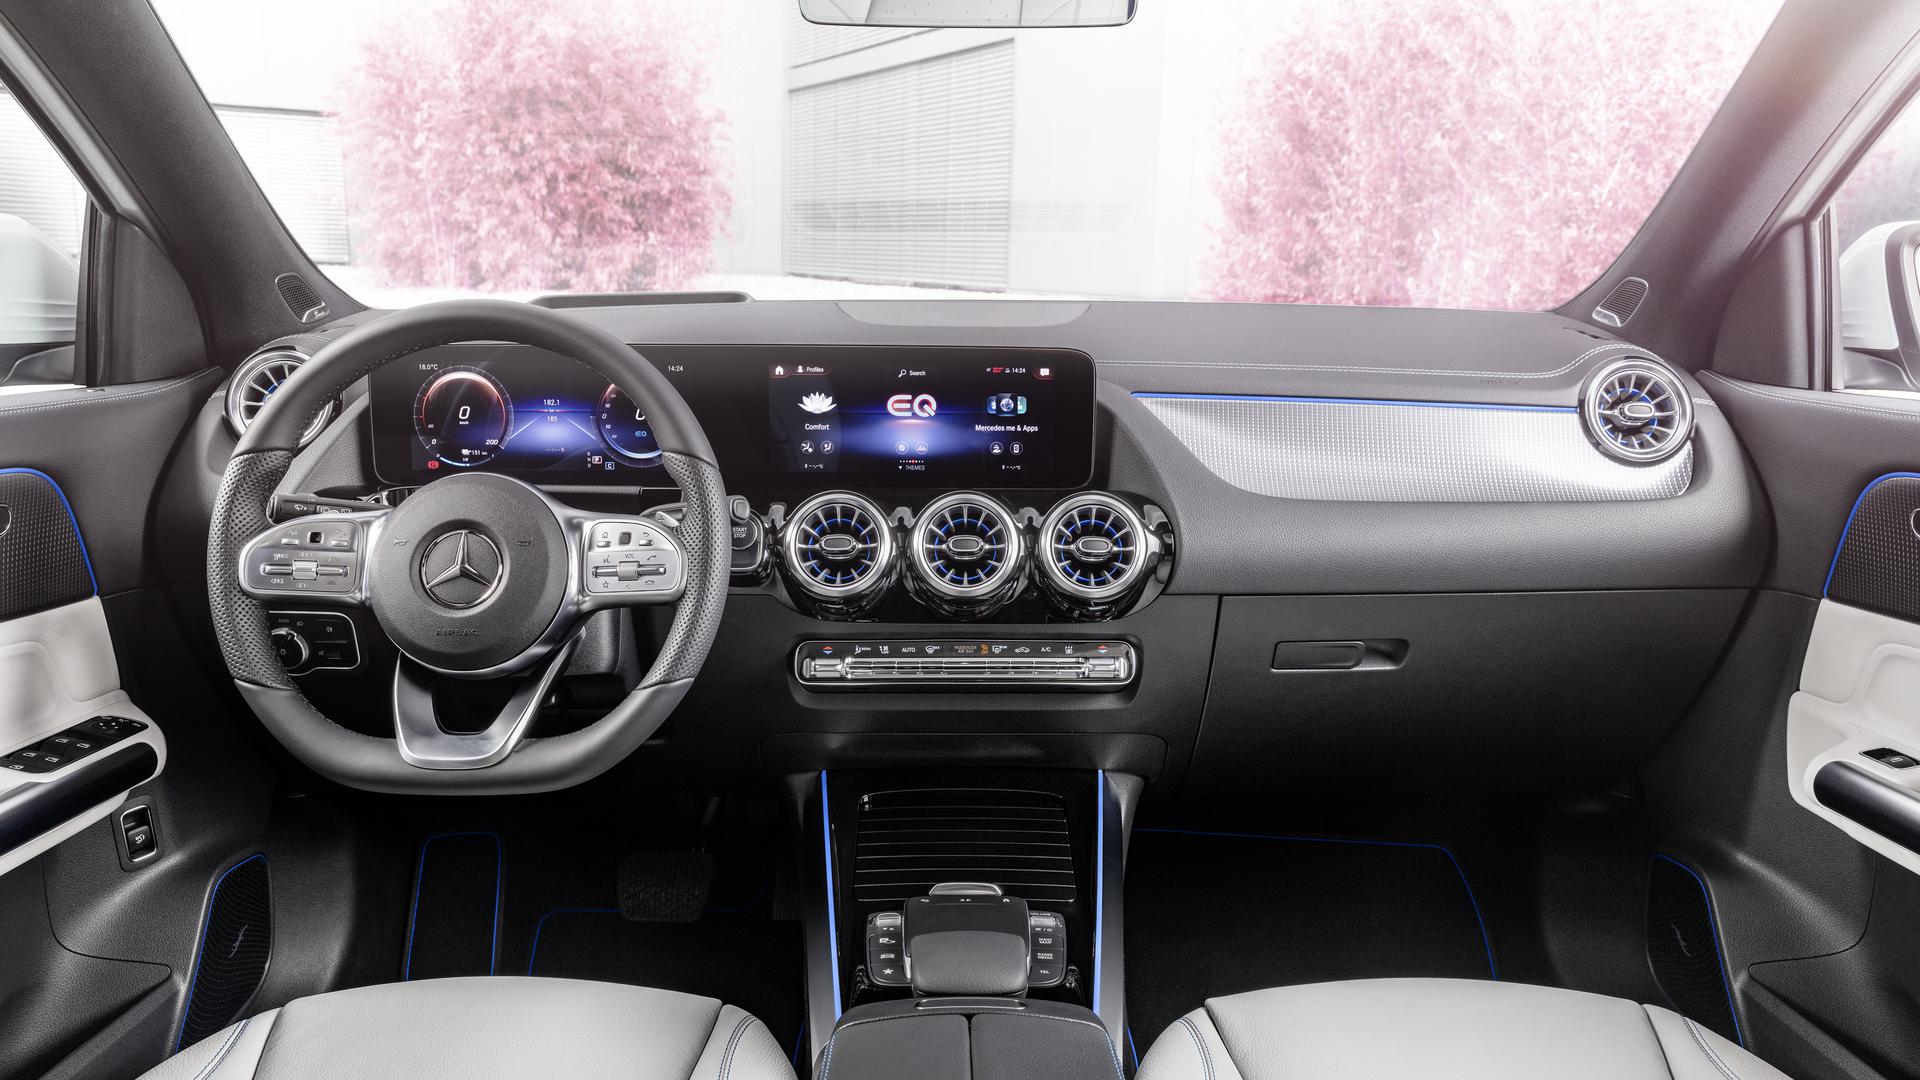 Mercedes-EQ, EQA 250, Interieur, Nevagrau, Edition 1. EQA 250 (Stromverbrauch kombiniert: 15,7 kWh/100 km; CO2-Emissionen kombiniert: 0 g/km) // Mercedes-EQ, EQA 250, Interior, neva grey, Edition 1. EQA 250 (combined power consumption: 15.7 kWh/100 km, combined CO2 emissions: 0 g/km)